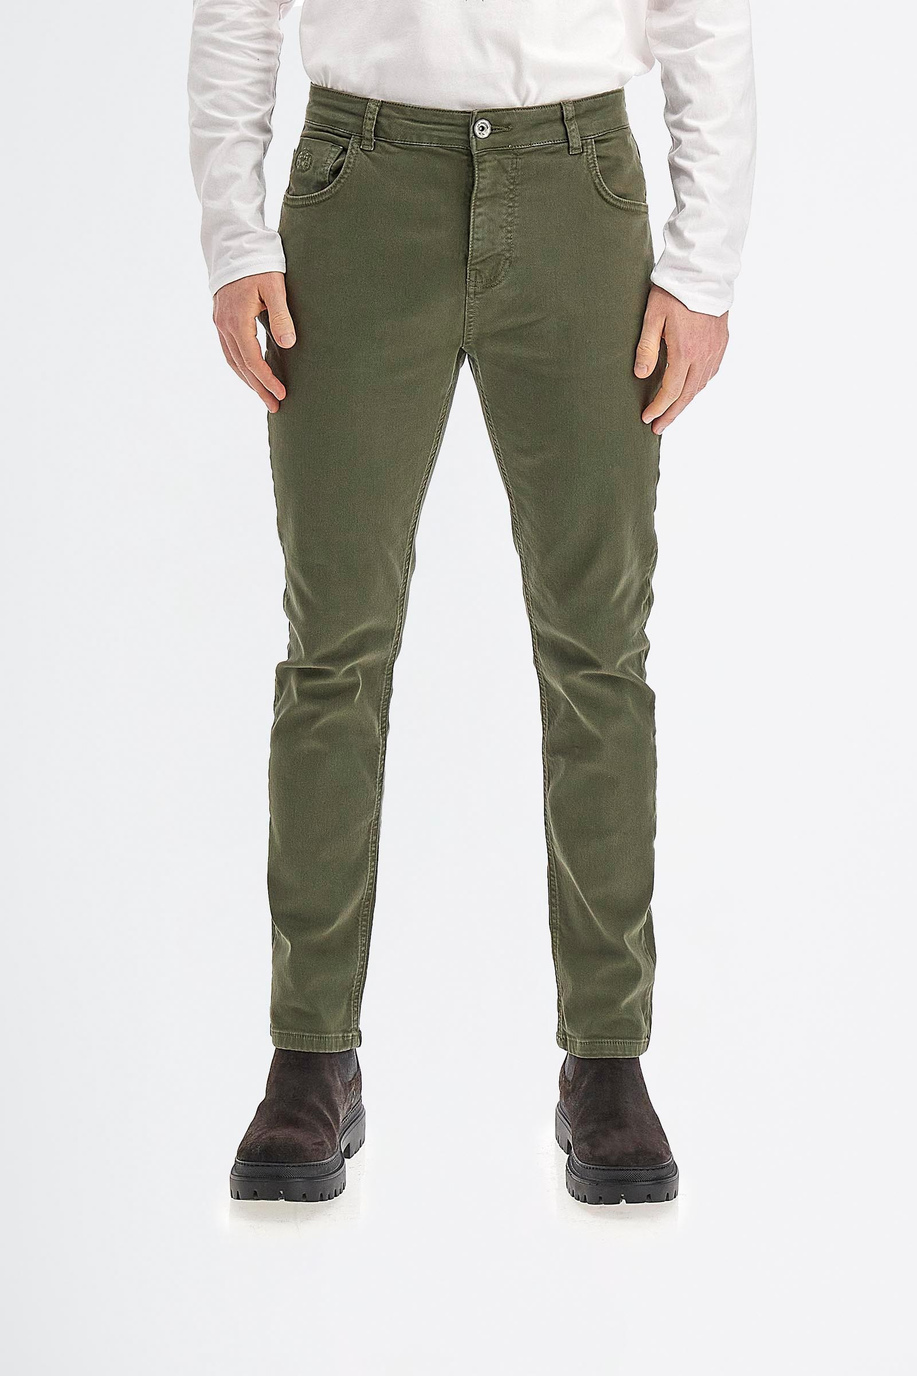 Men’s trousers in stretch cotton regular fit chino model - SALE | La Martina - Official Online Shop